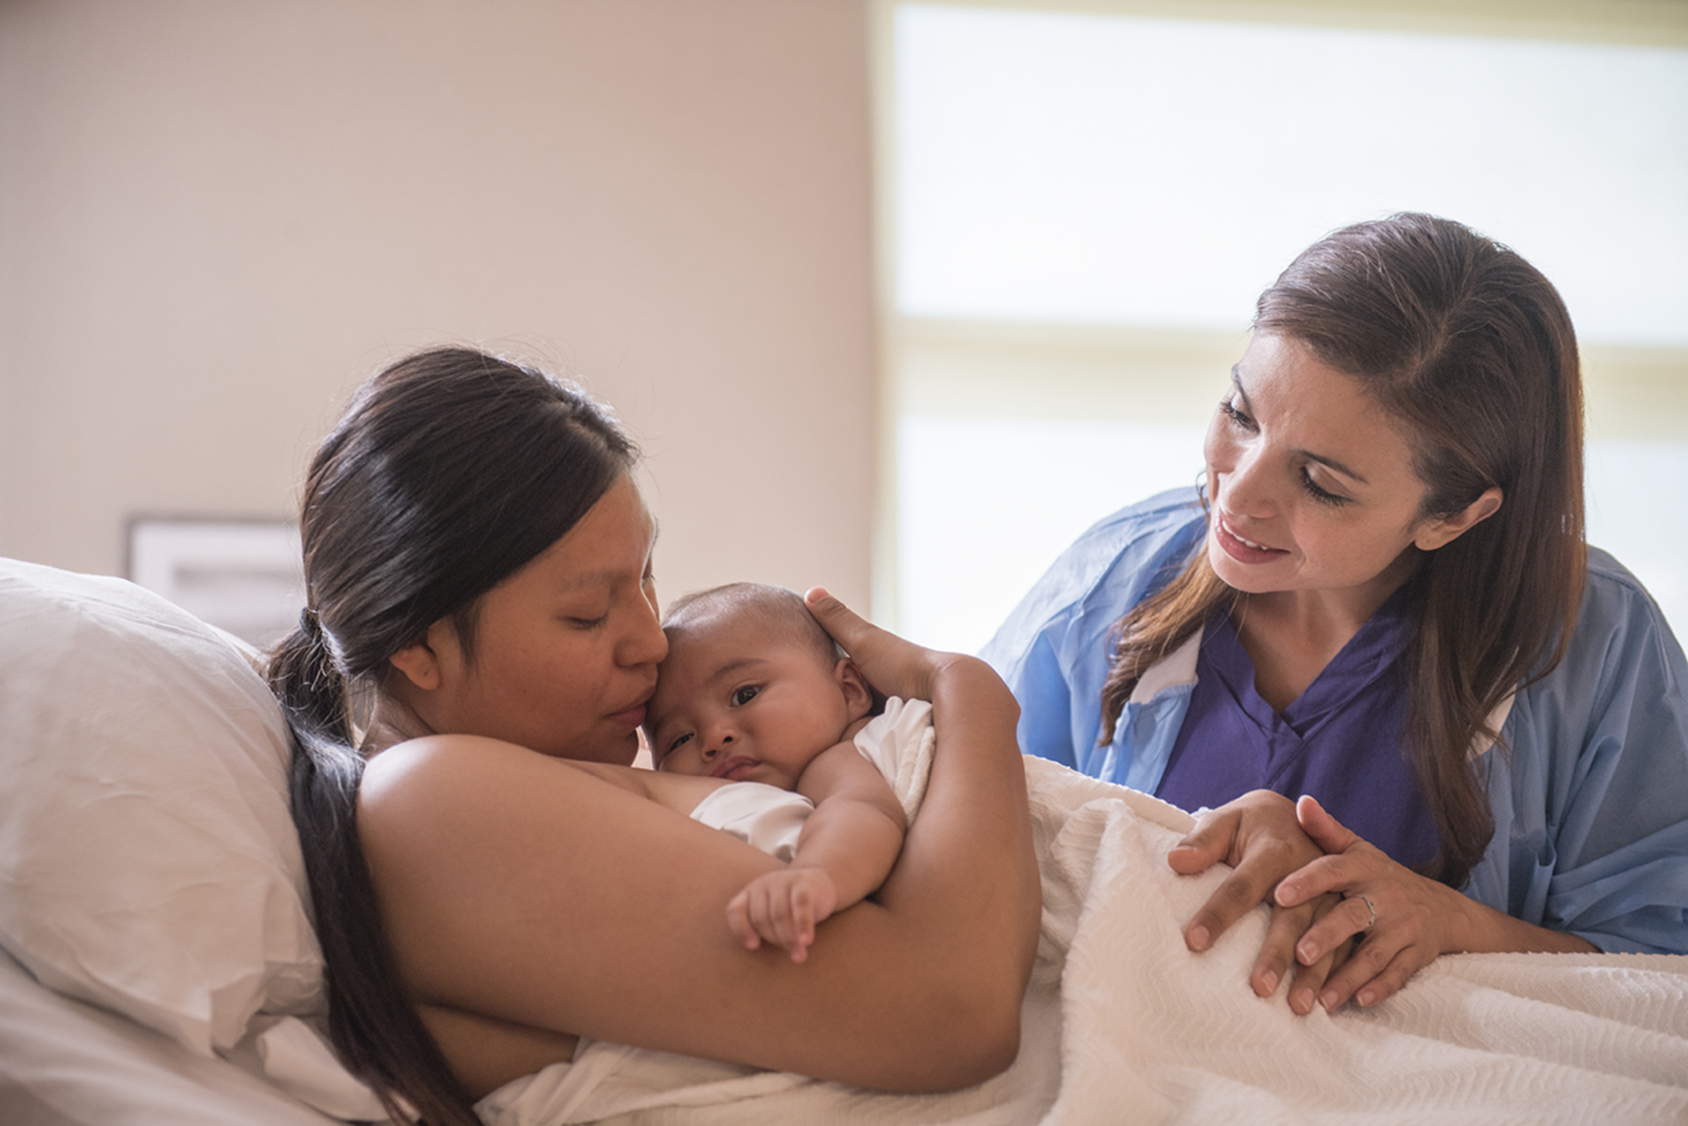 A nurse and a mother with her newborn